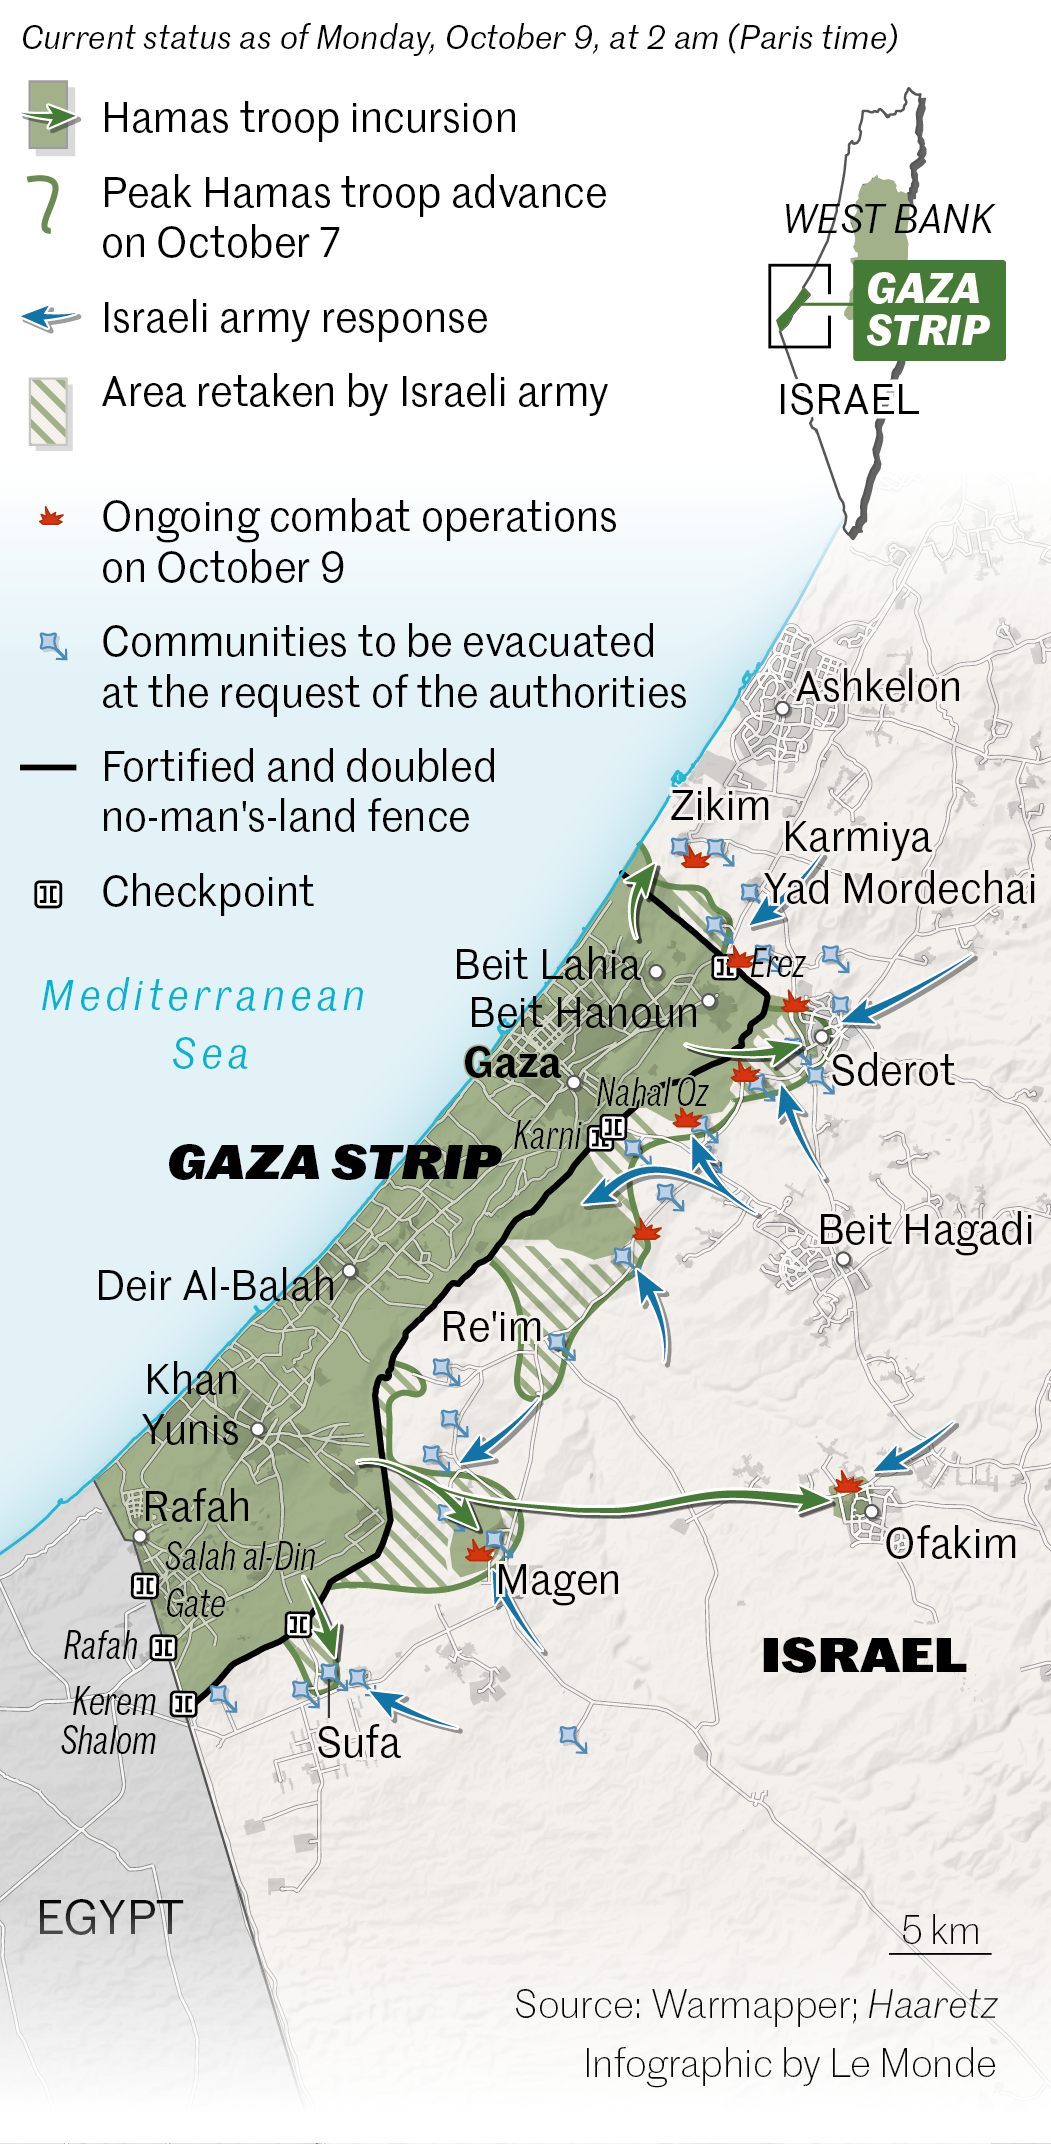 The dangers of Israel's military response in Gaza